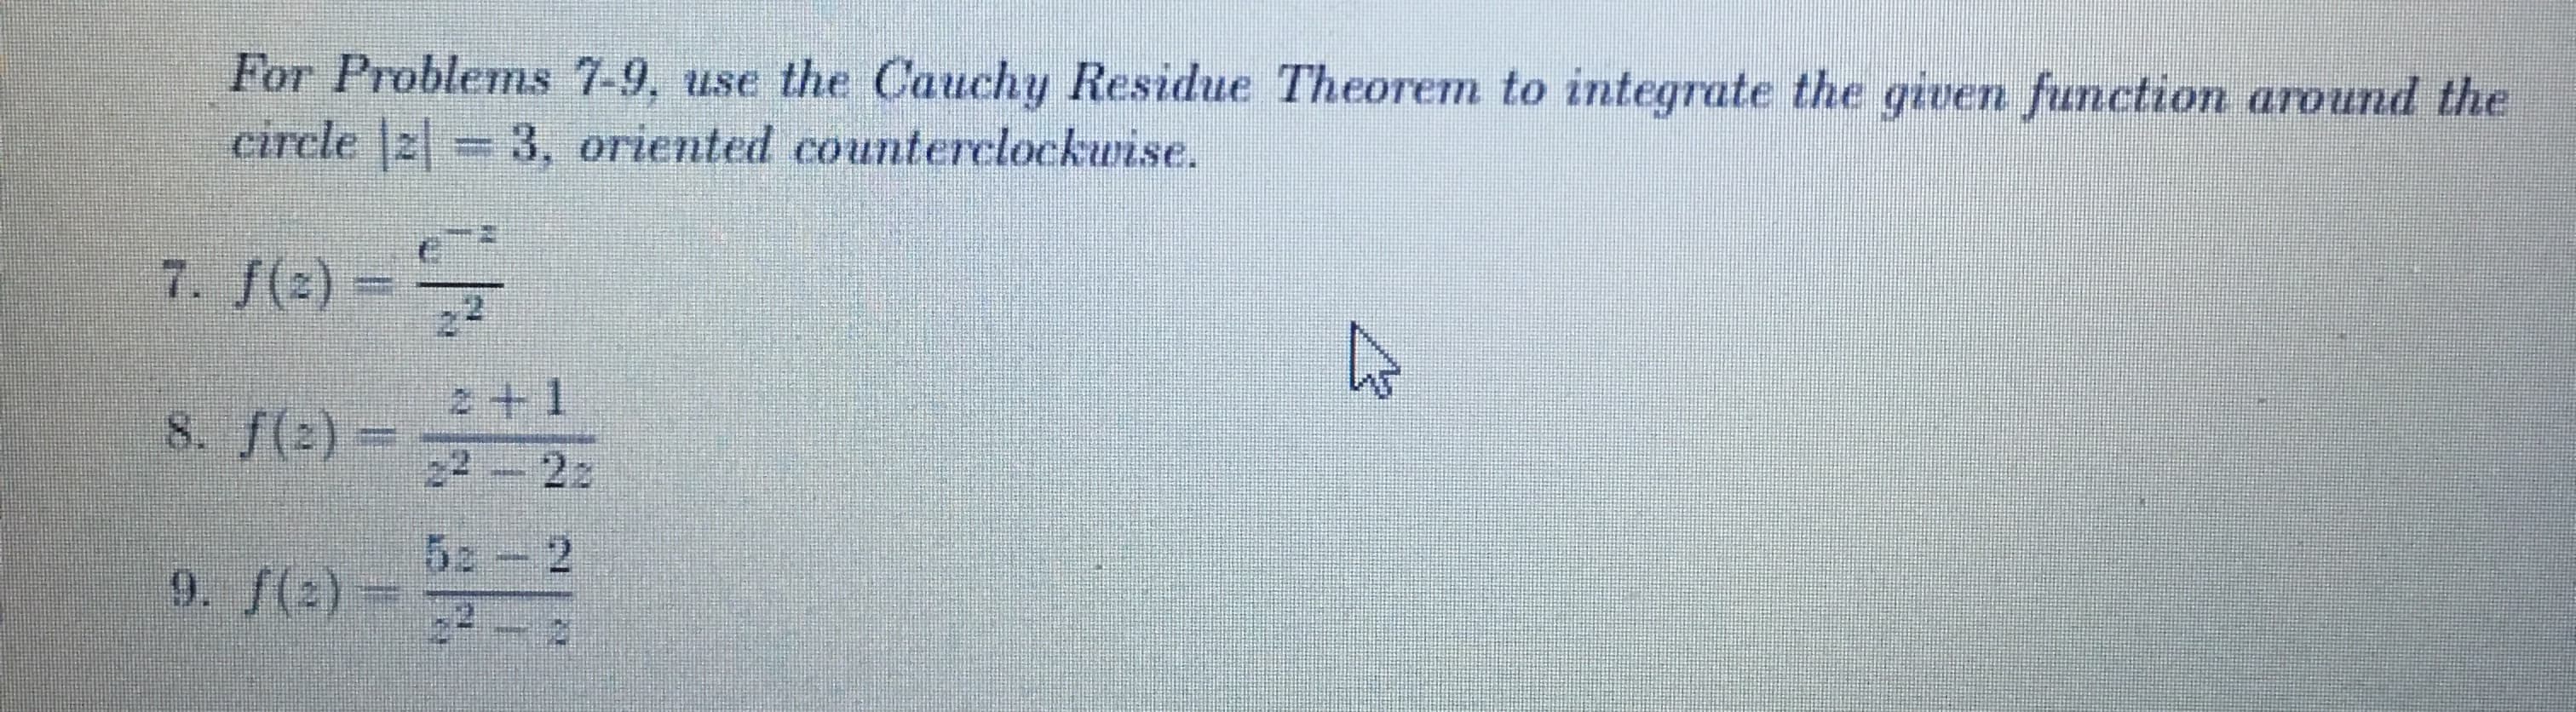 - use the Cauchy Residue Theorem to integrate the given function around the
